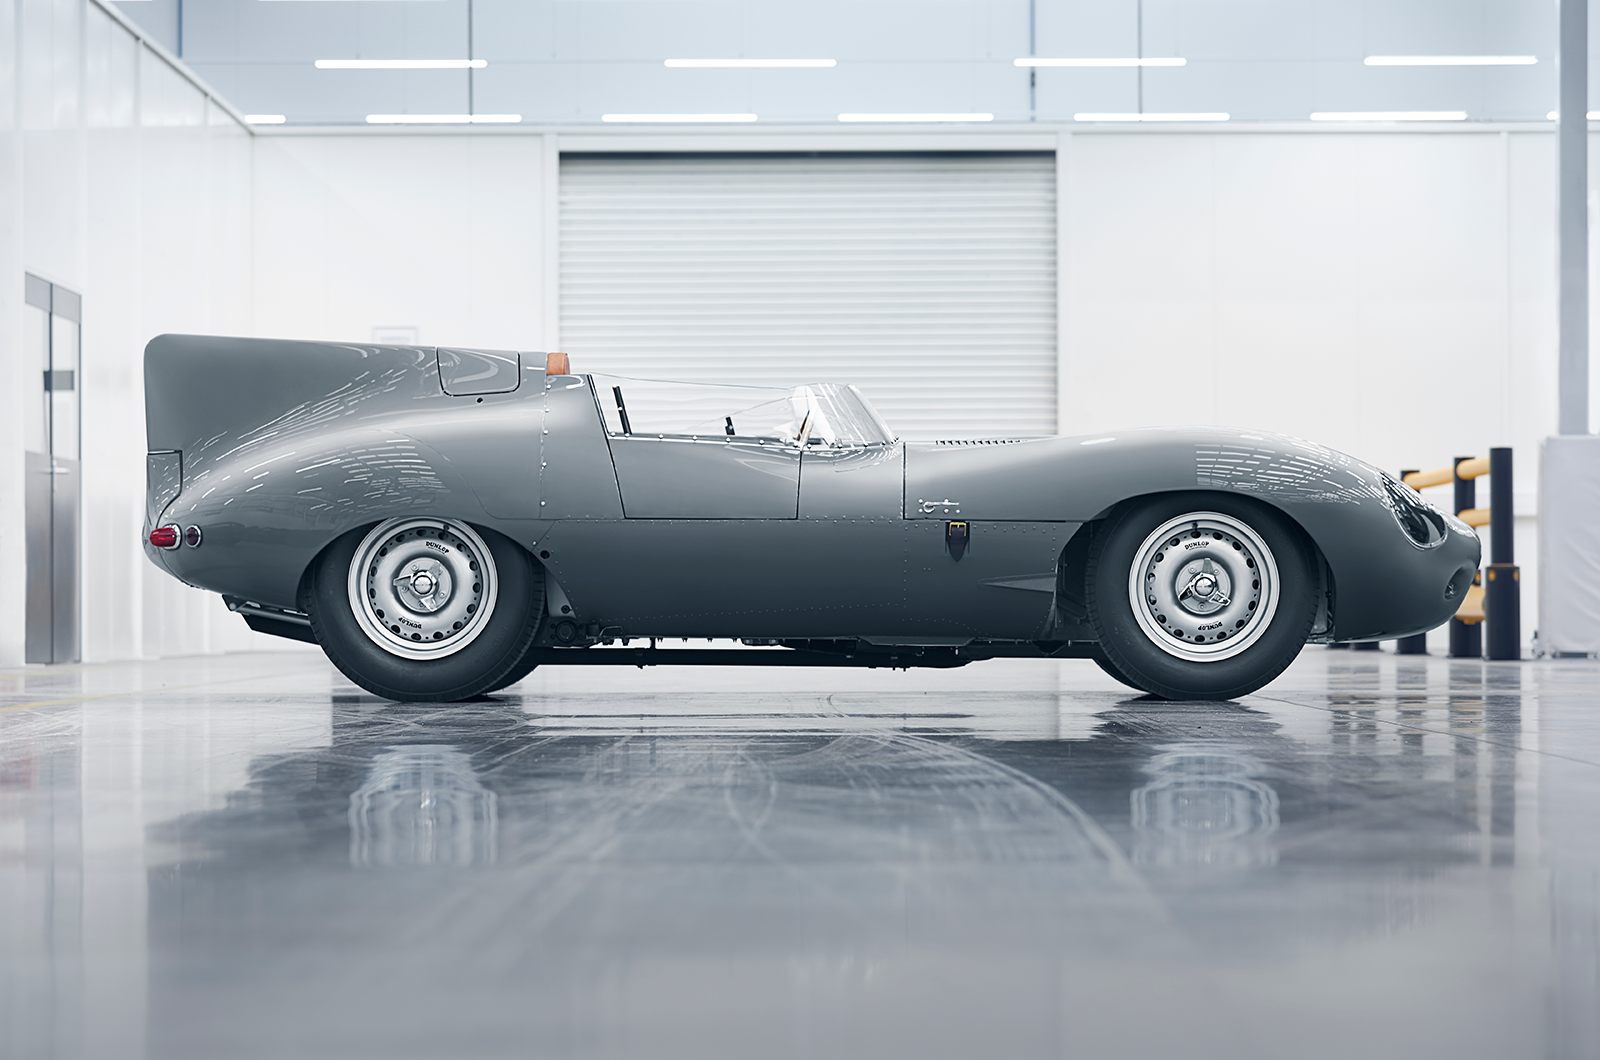 Jaguar's remaking the iconic D-type